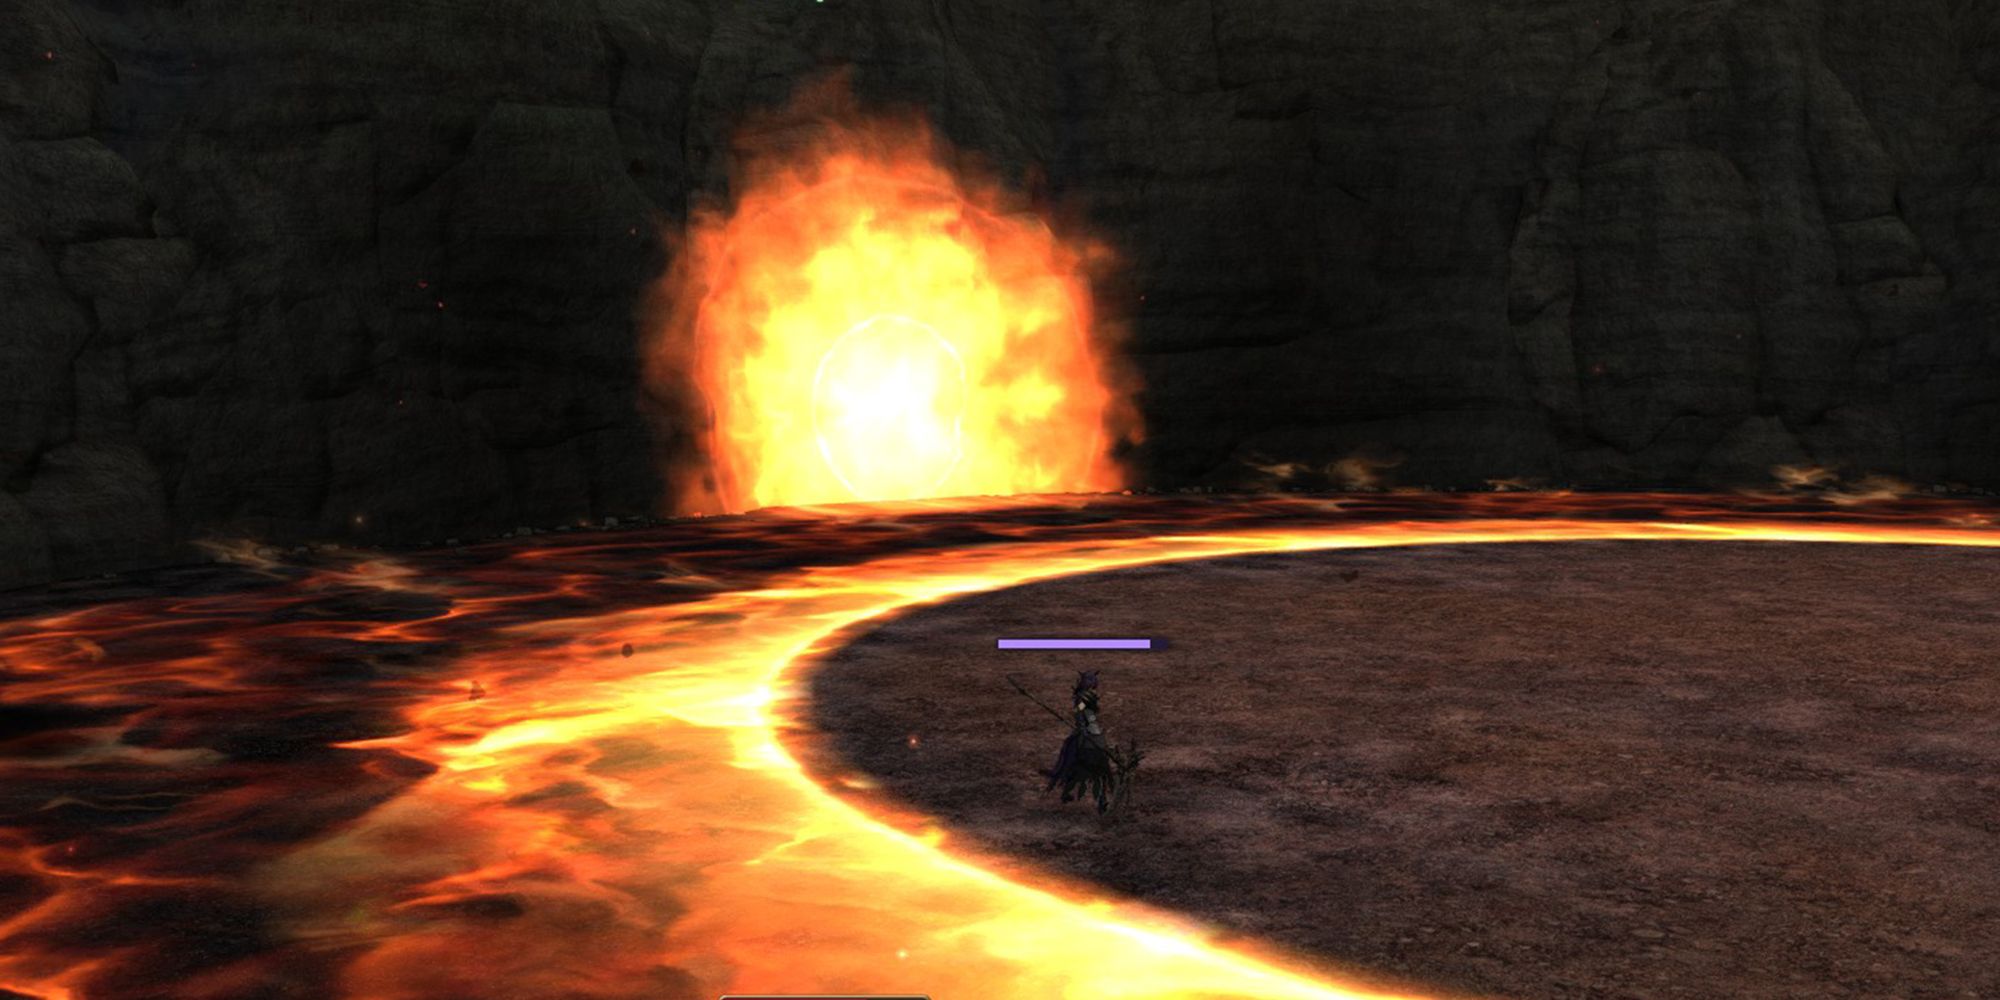 prometheus using burrow to move into arena walls and heat to fire a blast across the arena